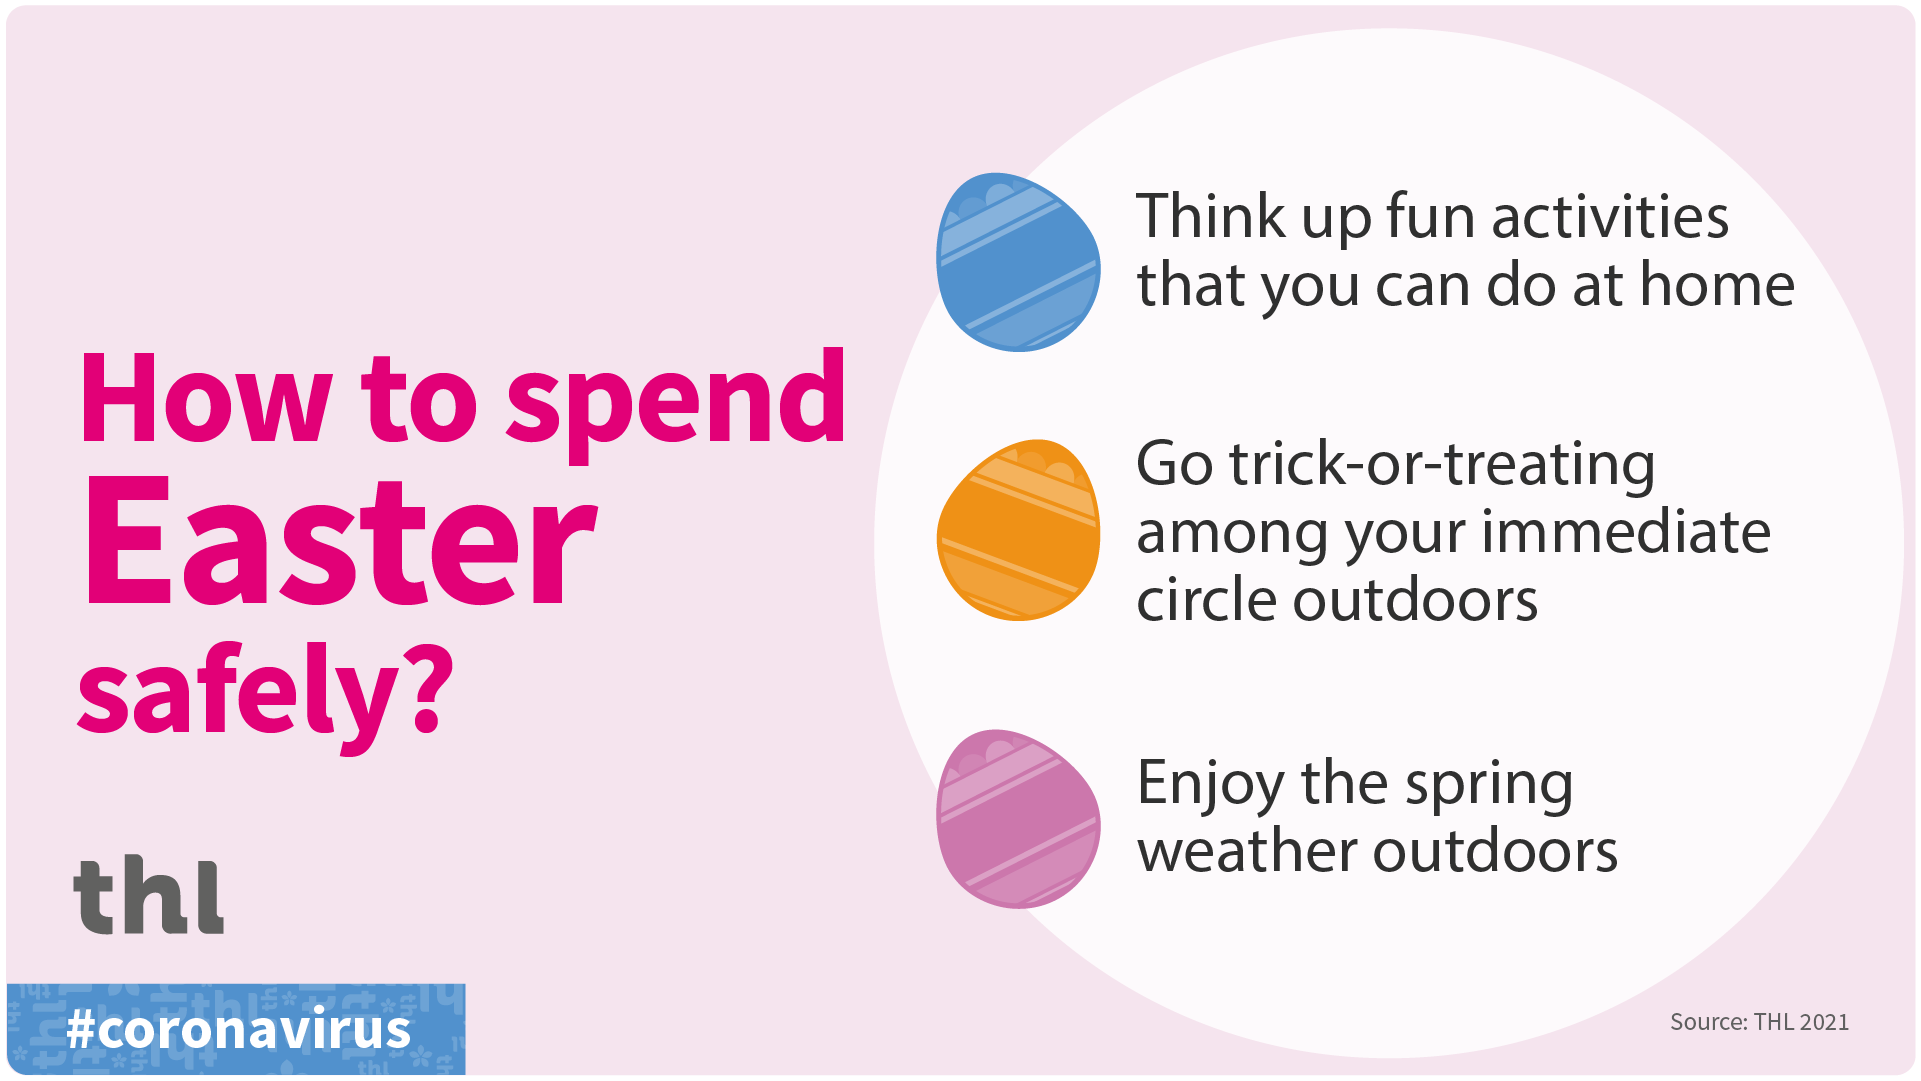 How to spend Easter safely?